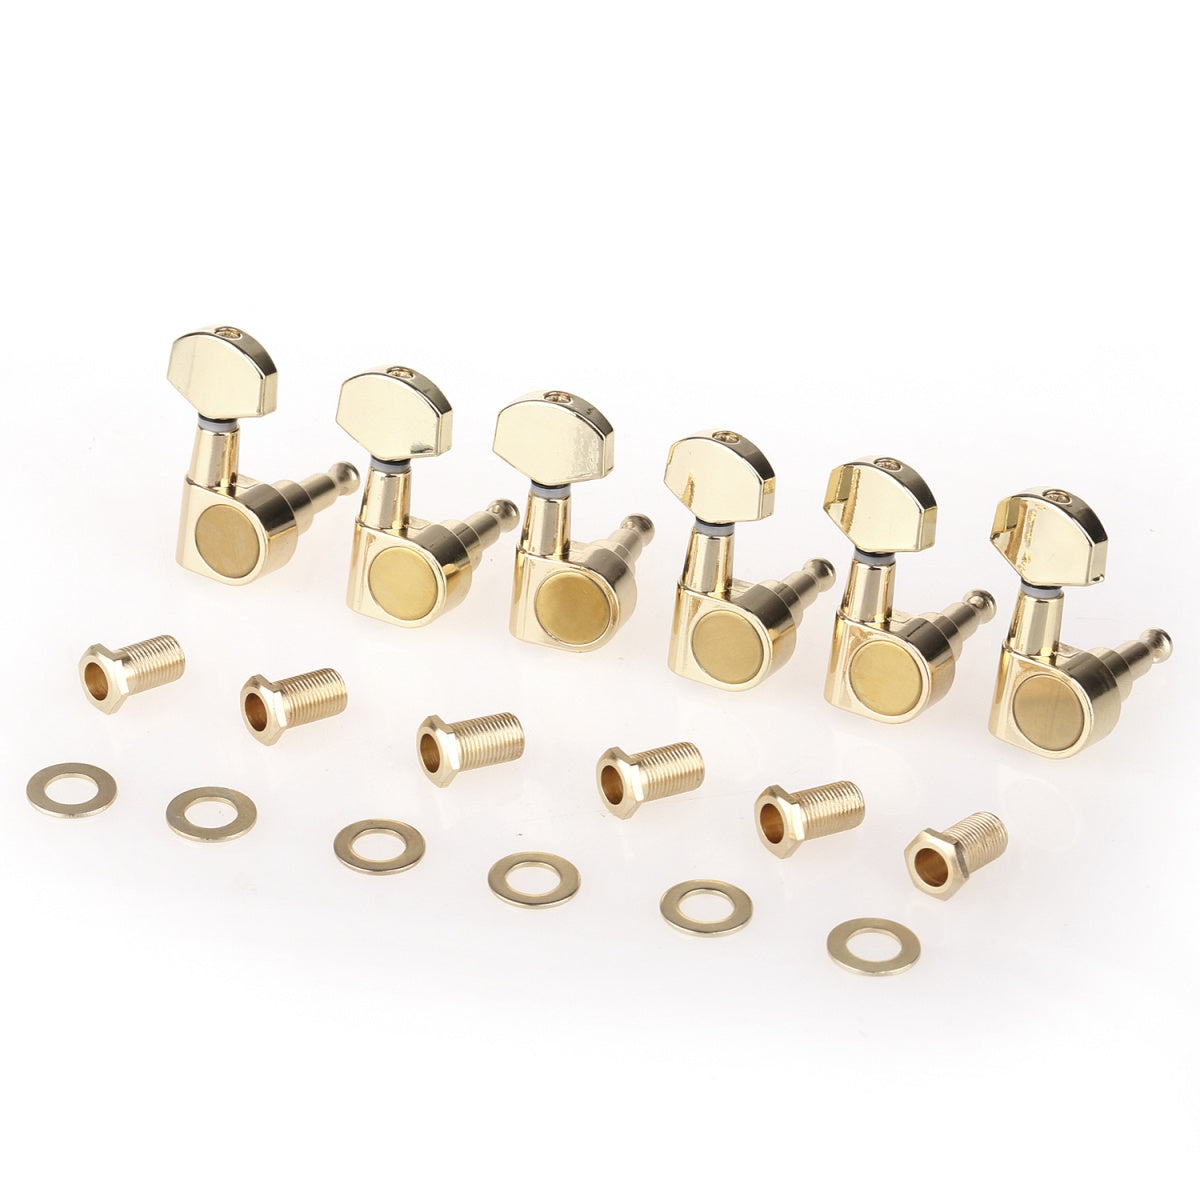 Musiclily Pro 6 in Line Sealed Dual Pin Guitar Tuners Tuning Pegs Keys Machine Heads Set for Squier Strat, Gold